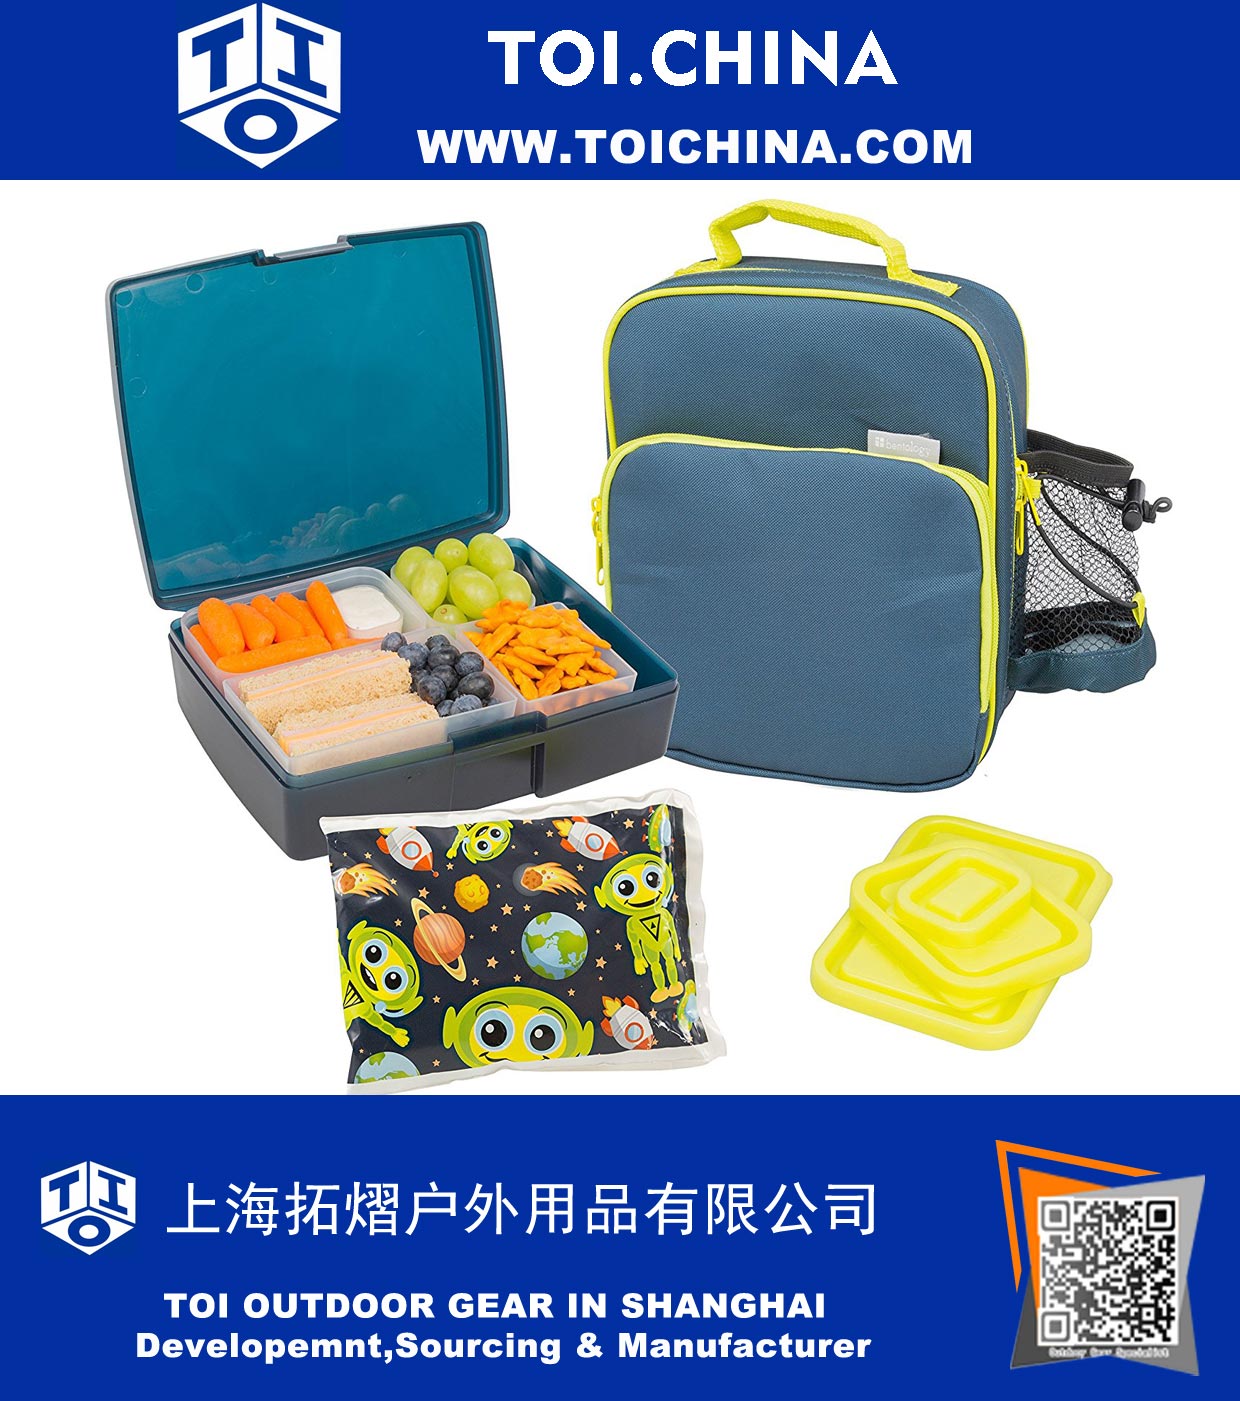 Lunch Bag and Box Set - Includes Insulated Bag with Handle